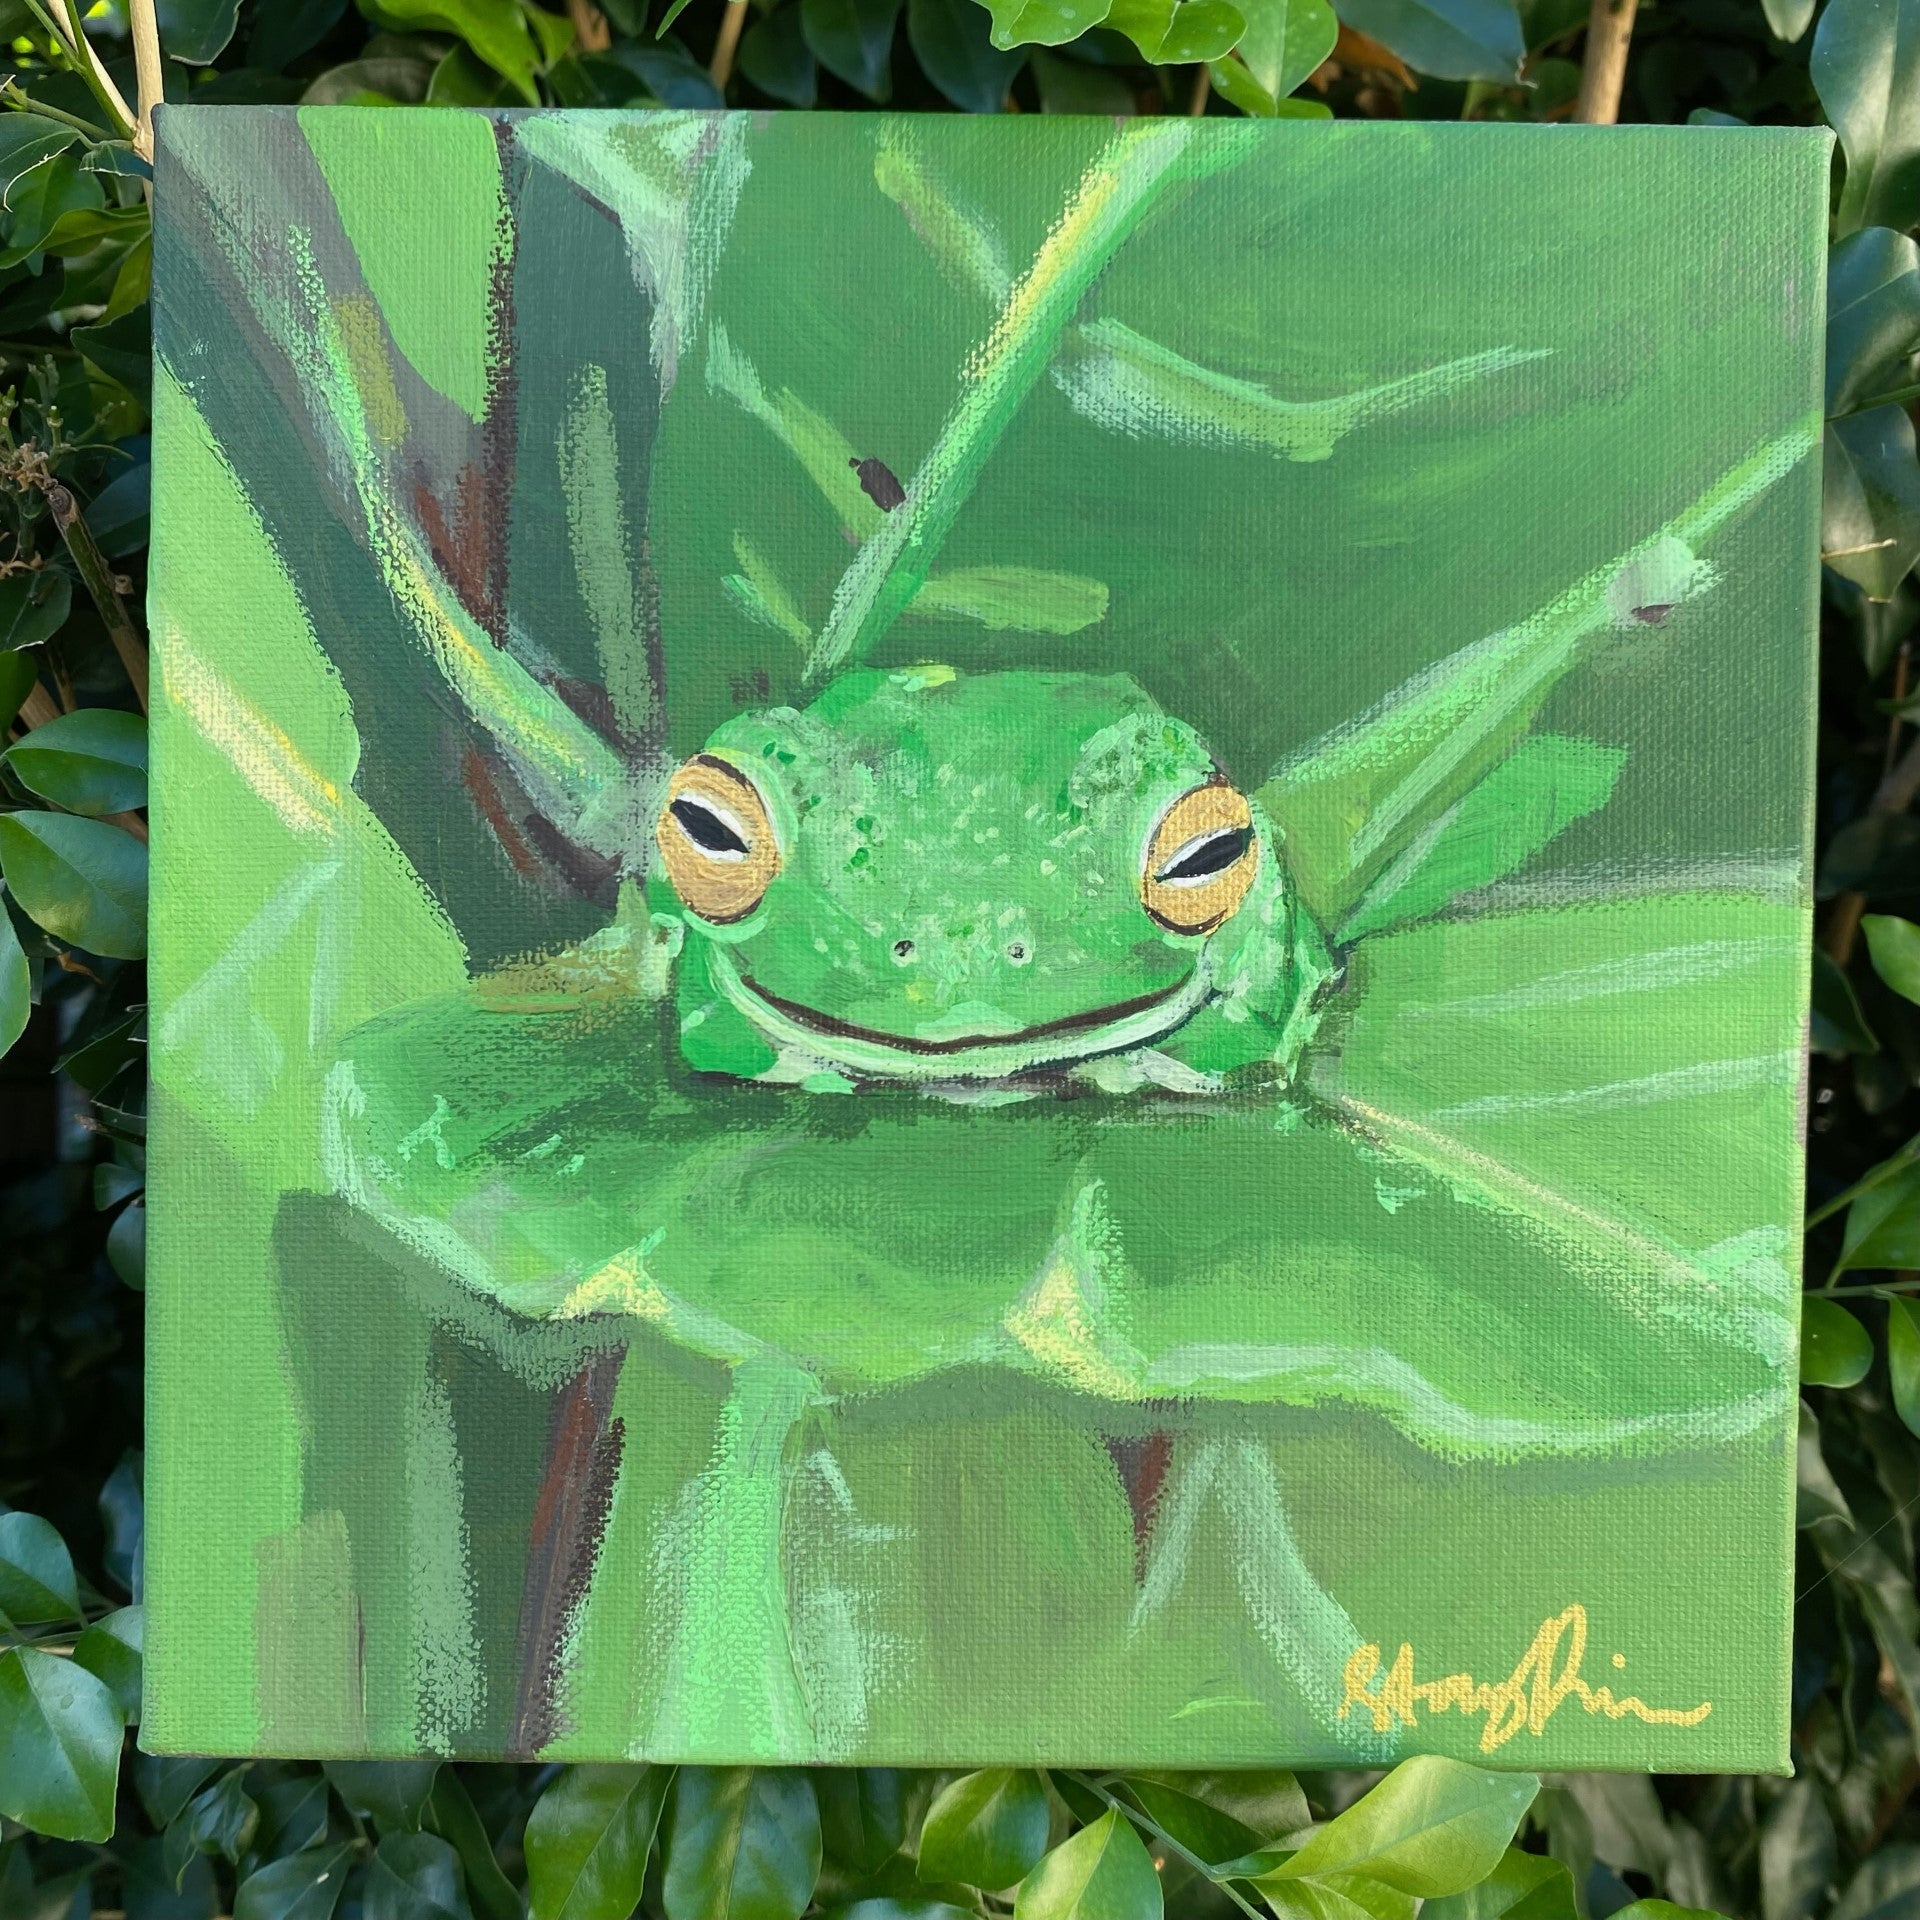 1. @staceyprince_art painting of a green frog sitting on a leaf, with a green, lucious background